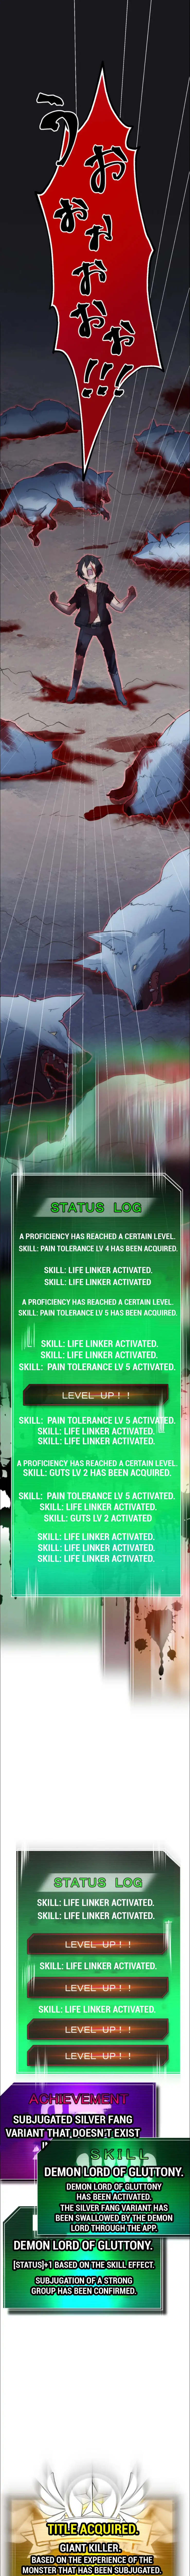 I Became An S-Rank Hunter With The Demon Lord App - Page 1